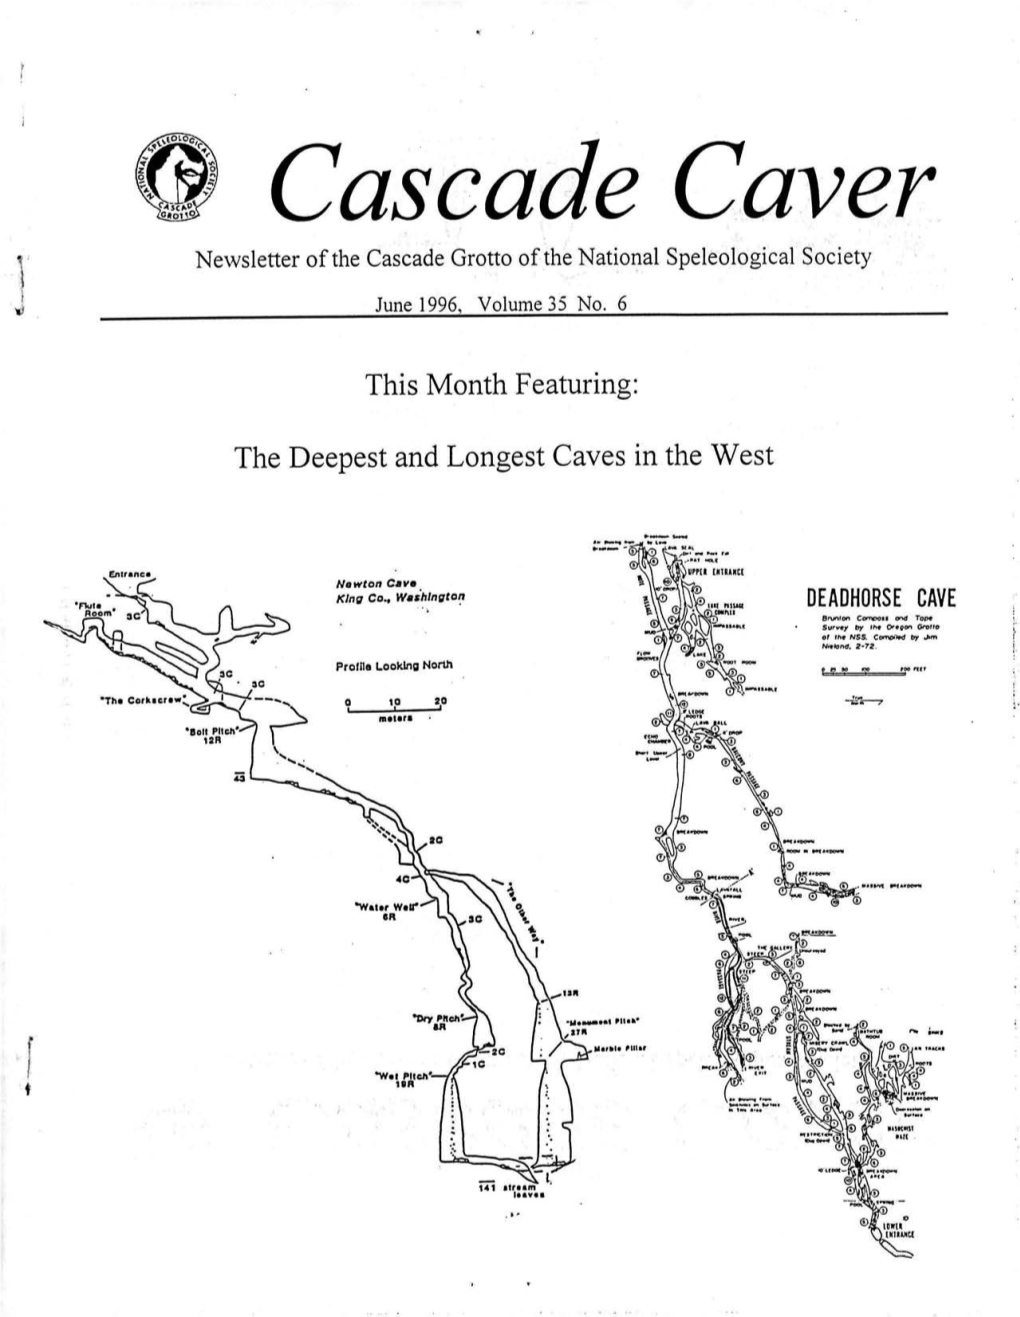 Cascade Caver Newsletter of the Cascade Grotto of the National Speleological Society